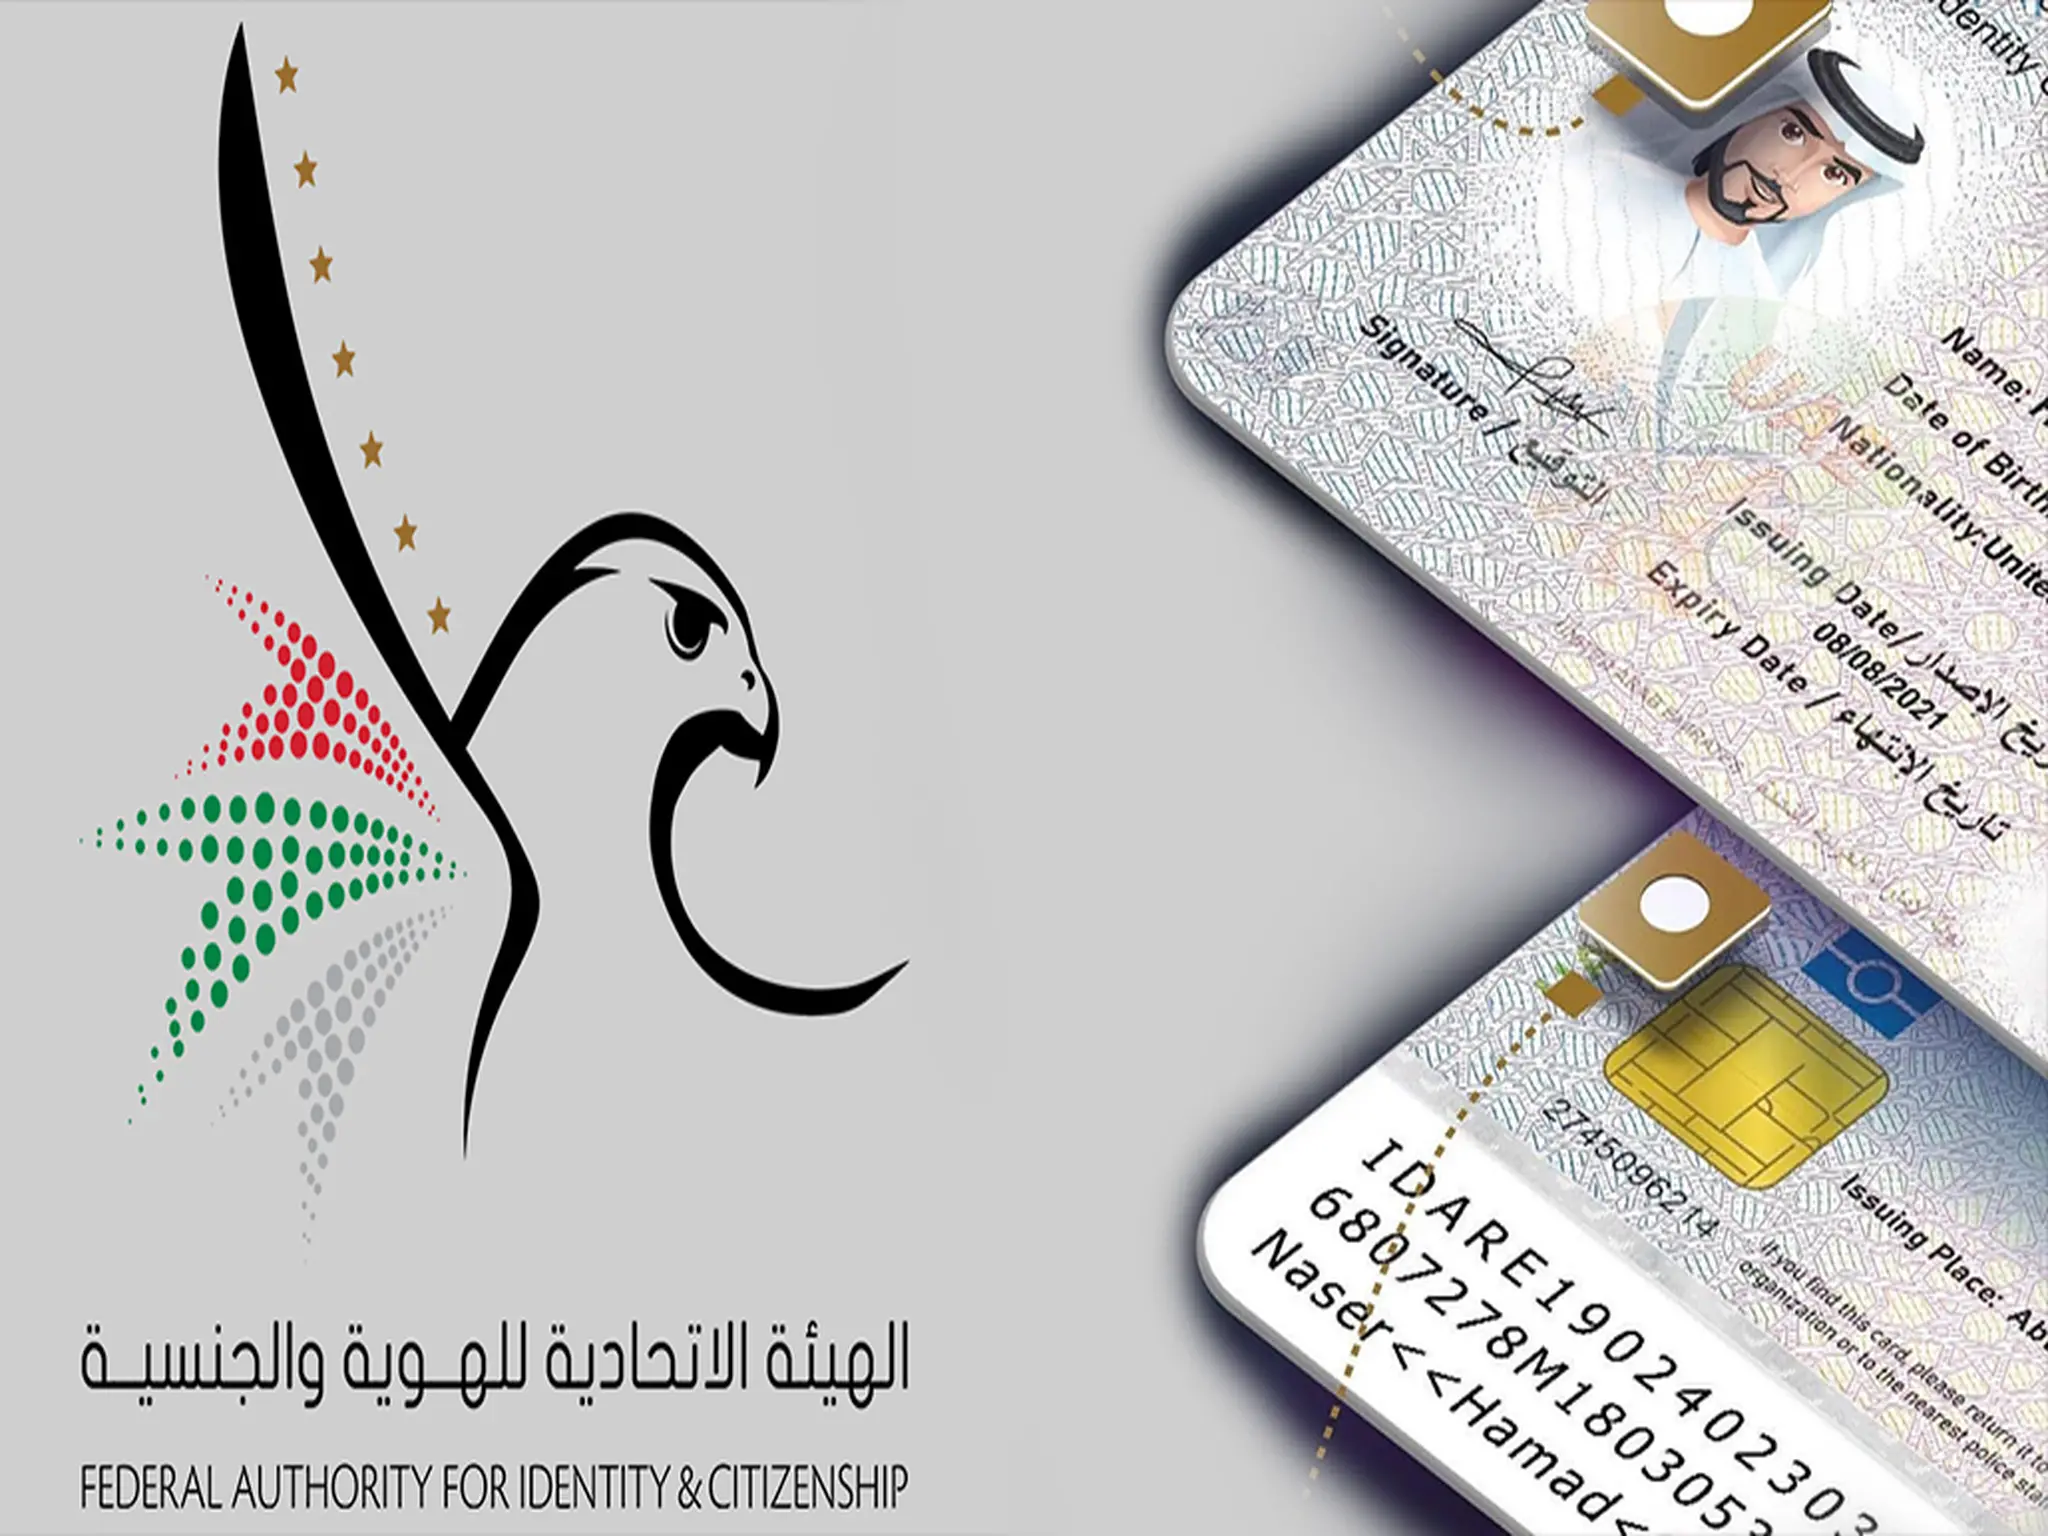 Identity and nationality: allow the renewal of the "identity" and passport from outside the country, but on co